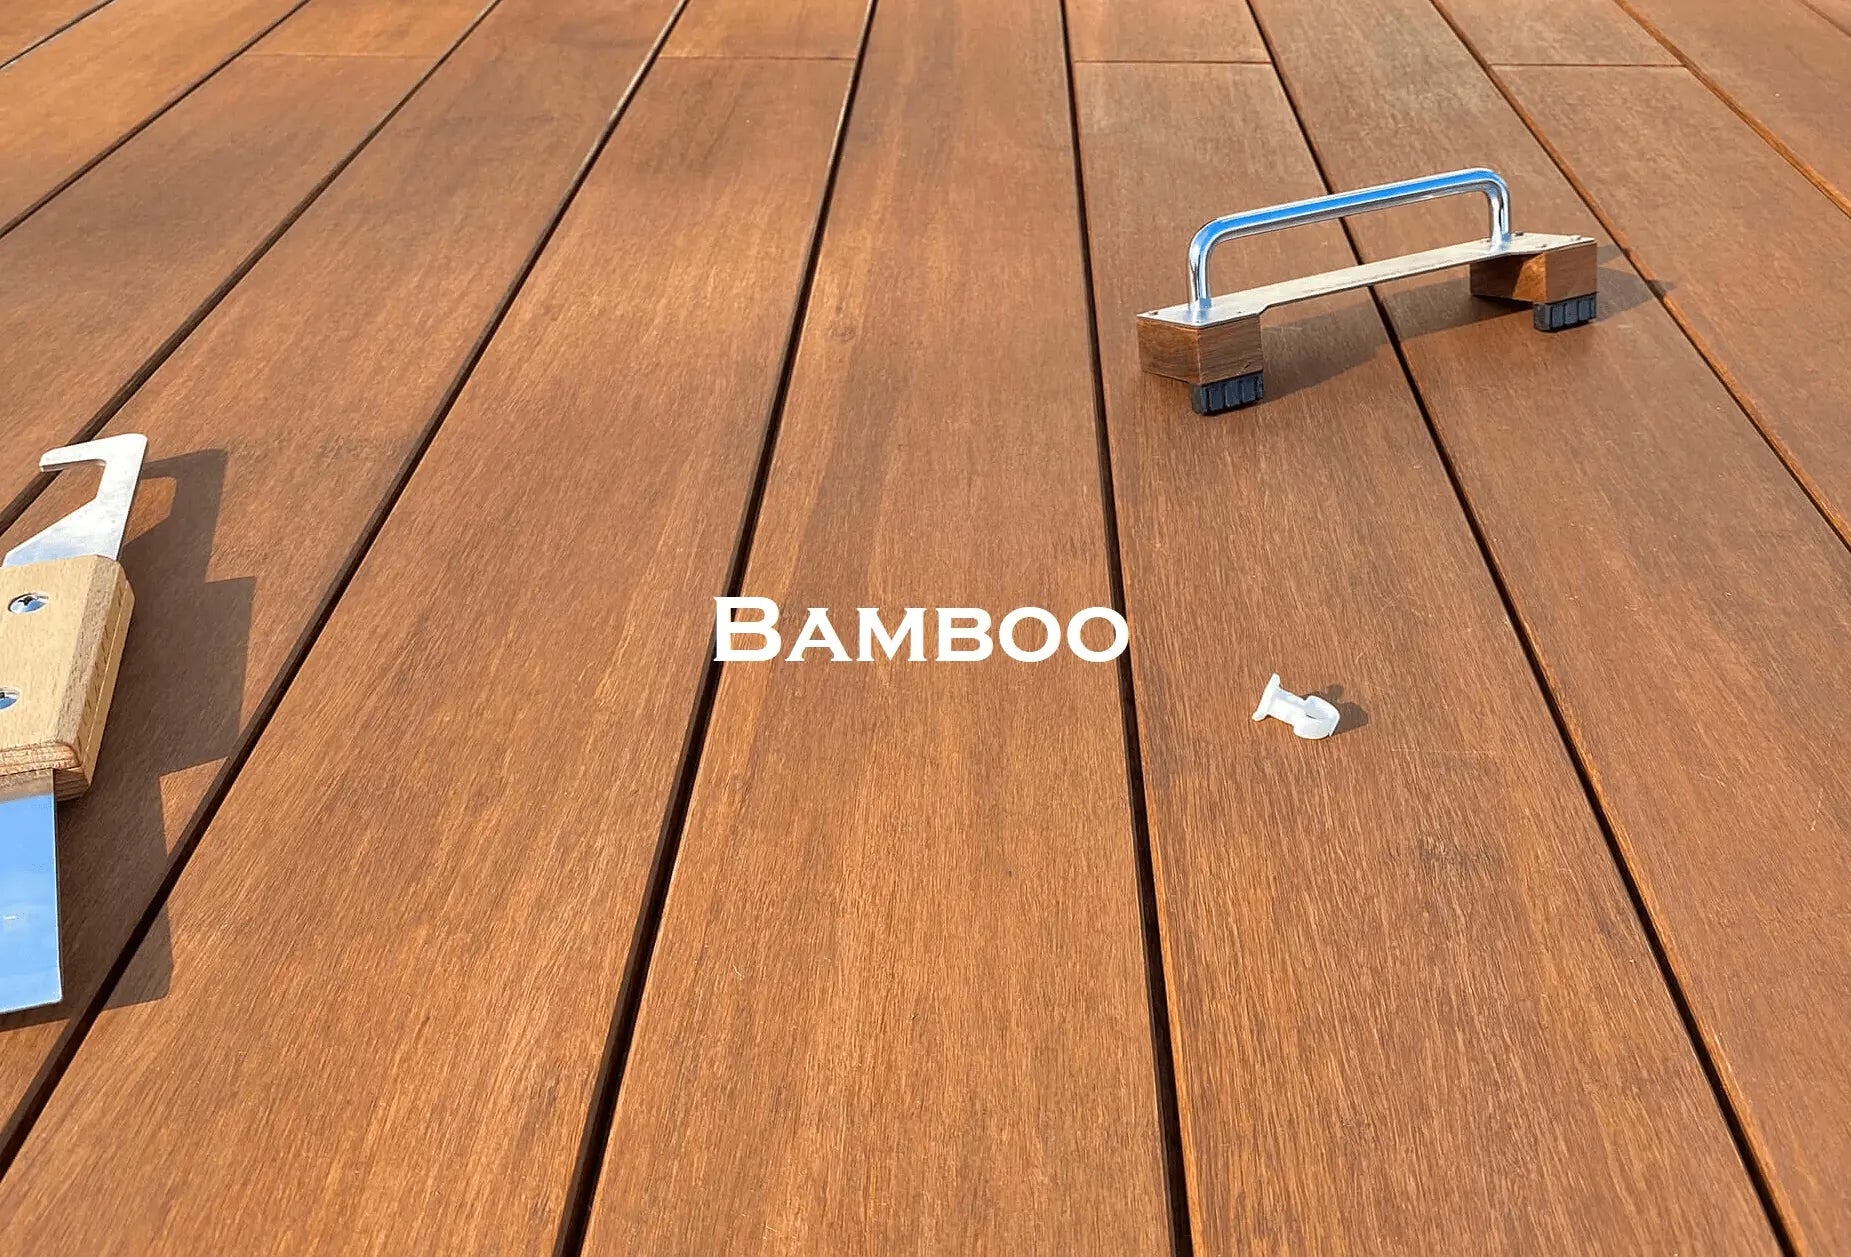 Bamboo Deck boards